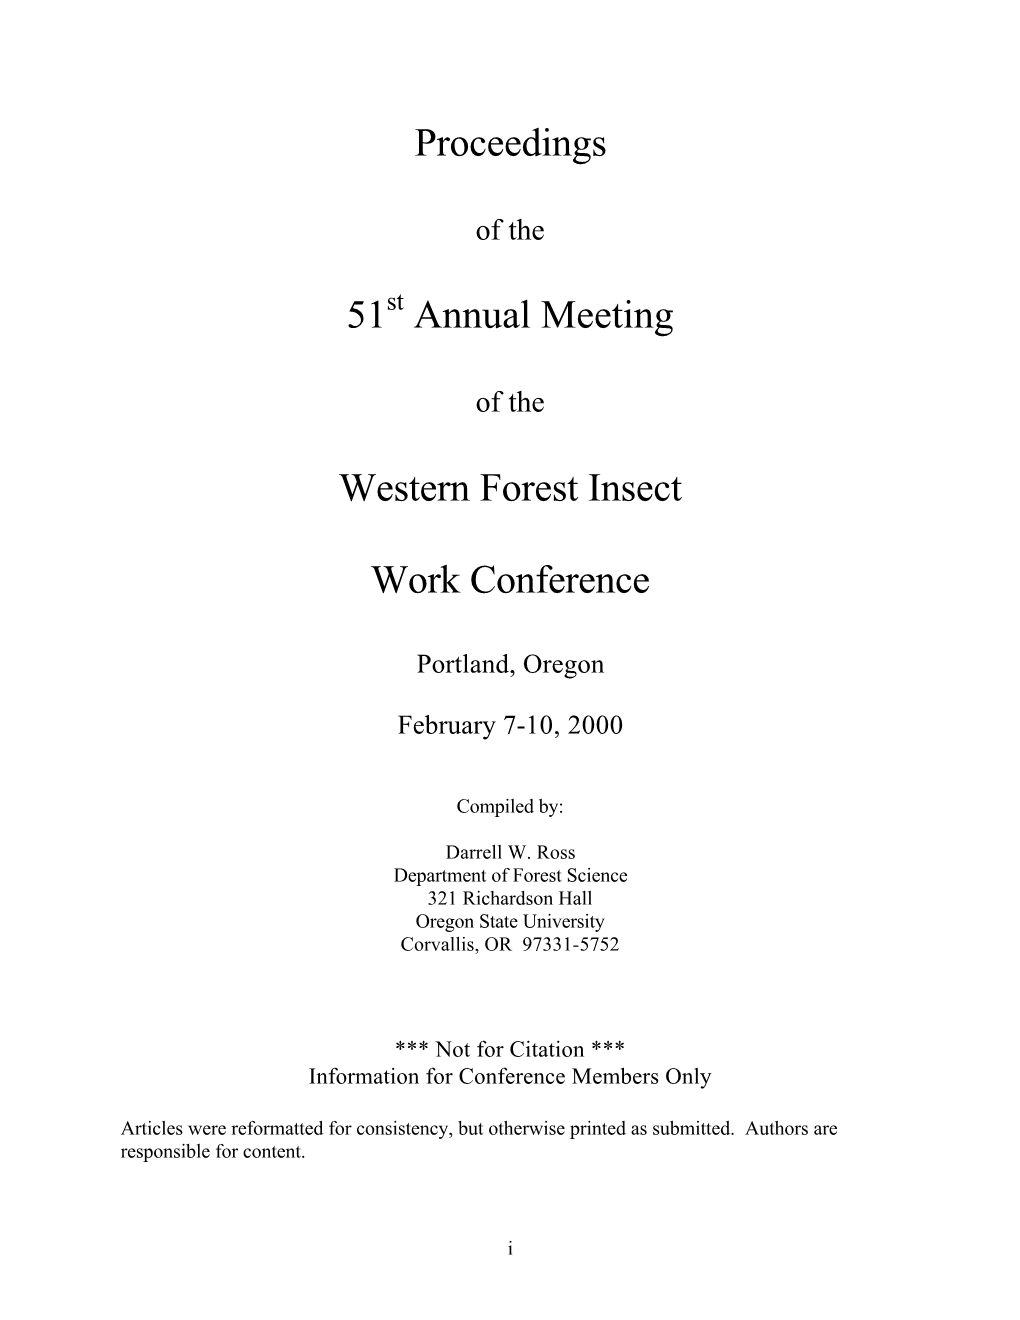 Proceedings 51 Annual Meeting Western Forest Insect Work